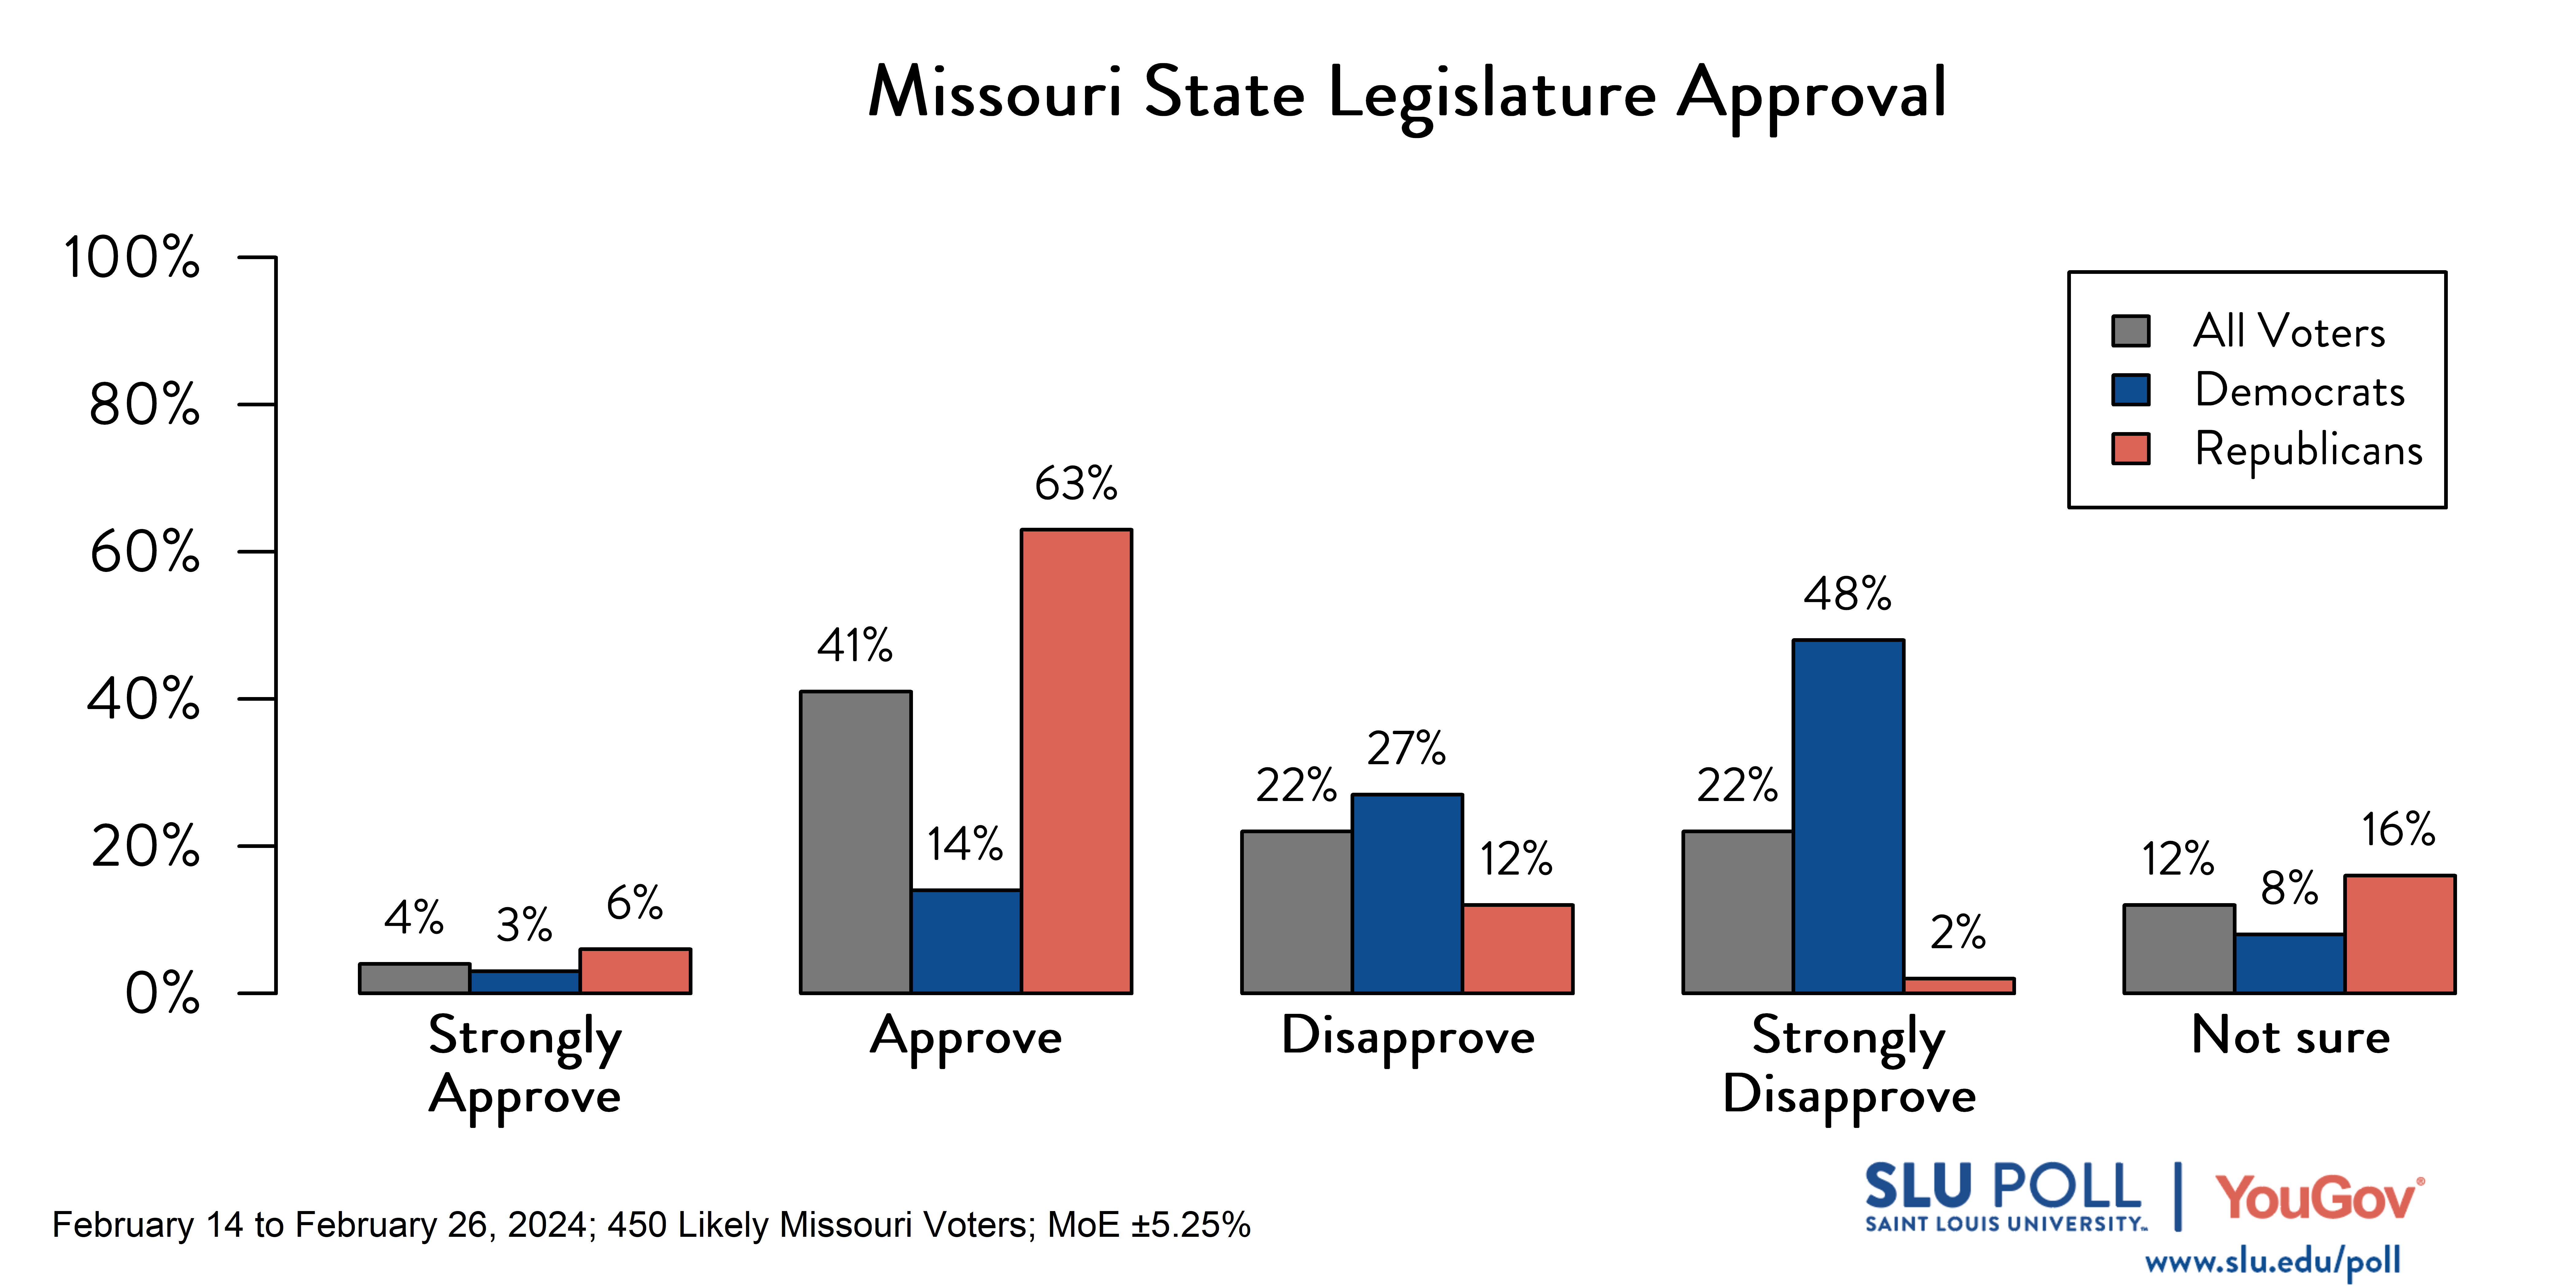 Likely voters' responses to 'Do you approve or disapprove of the way each is doing their job…The Missouri State Legislature?': 4% Strongly approve, 41% Approve, 22% Disapprove, 22% Strongly disapprove, and 12% Not sure. Democratic voters' responses: ' 3% Strongly approve, 14% Approve, 27% Disapprove, 48% Strongly disapprove, and 8% Not sure. Republican voters' responses:  6% Strongly approve, 63% Approve, 12% Disapprove, 2% Strongly disapprove, and 16% Not sure.